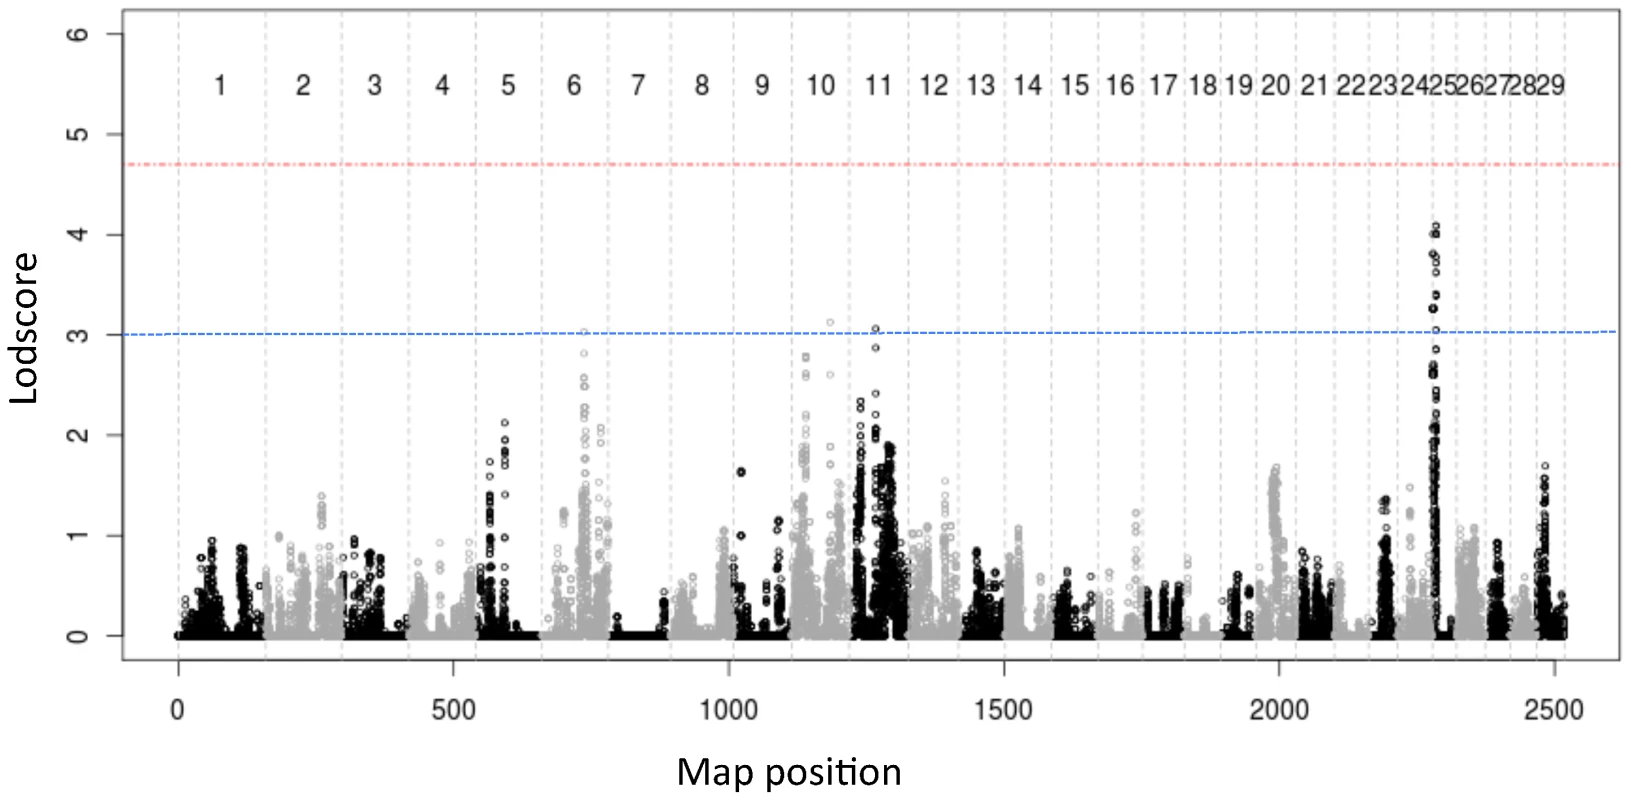 Results of genome-scan for QTL affecting the normalized distance between pairs of CO events measured in base-pairs (GIL<sub>bp</sub>), using a method that simultaneously extracts linkage and LD signal <em class=&quot;ref&quot;>[<b>34</b>]</em>.